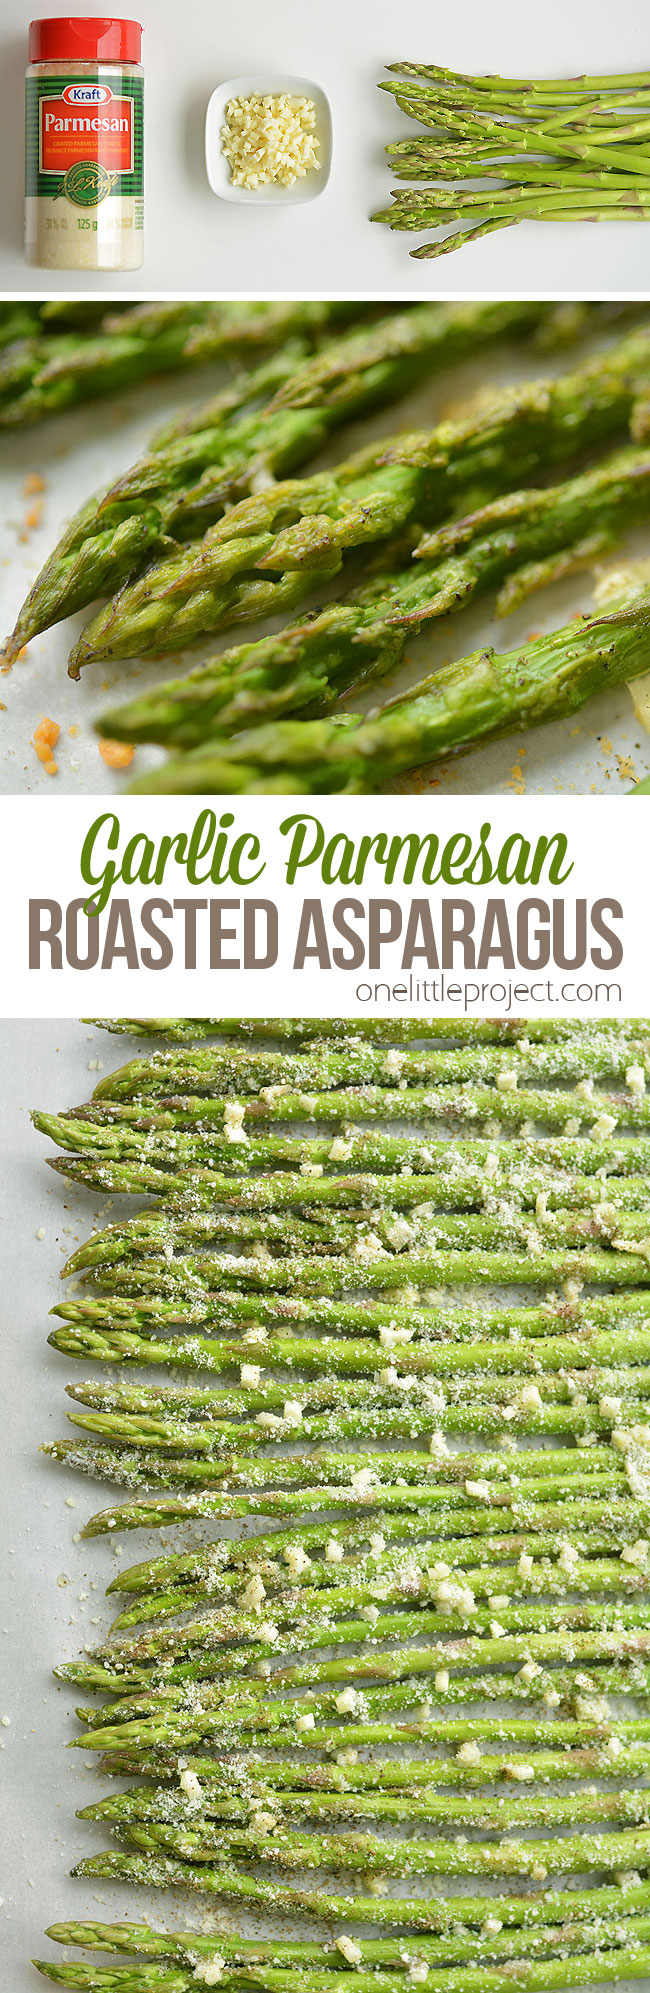 This garlic Parmesan roasted asparagus is SO GOOD and it's so simple to make! With only four ingredients you can make this easy side dish in 15 minutes! The garlic and Parmesan flavours taste amazing with the asparagus and go wonderfully with pasta or chicken dinners. This is such a great asparagus recipe and so delicious for spring and summer!